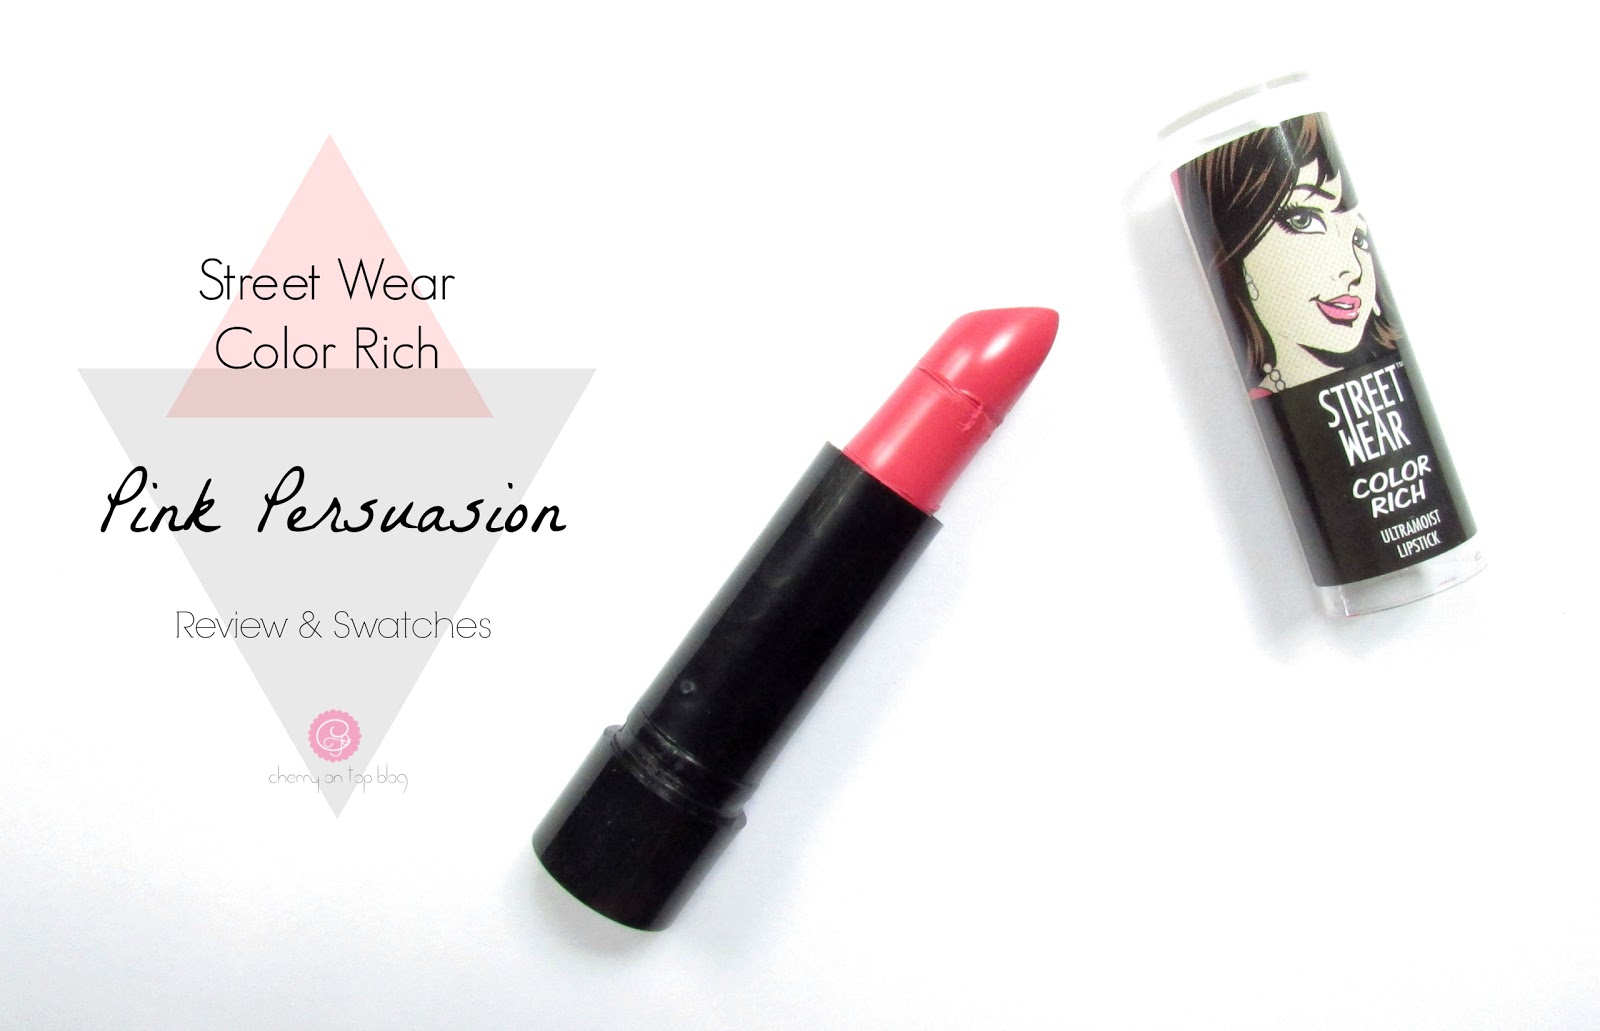 Street Wear Color Rich Ultra Moist Lipstick- Pink Persuasion| Review, Swatch, Price| Cherry On Top Blog